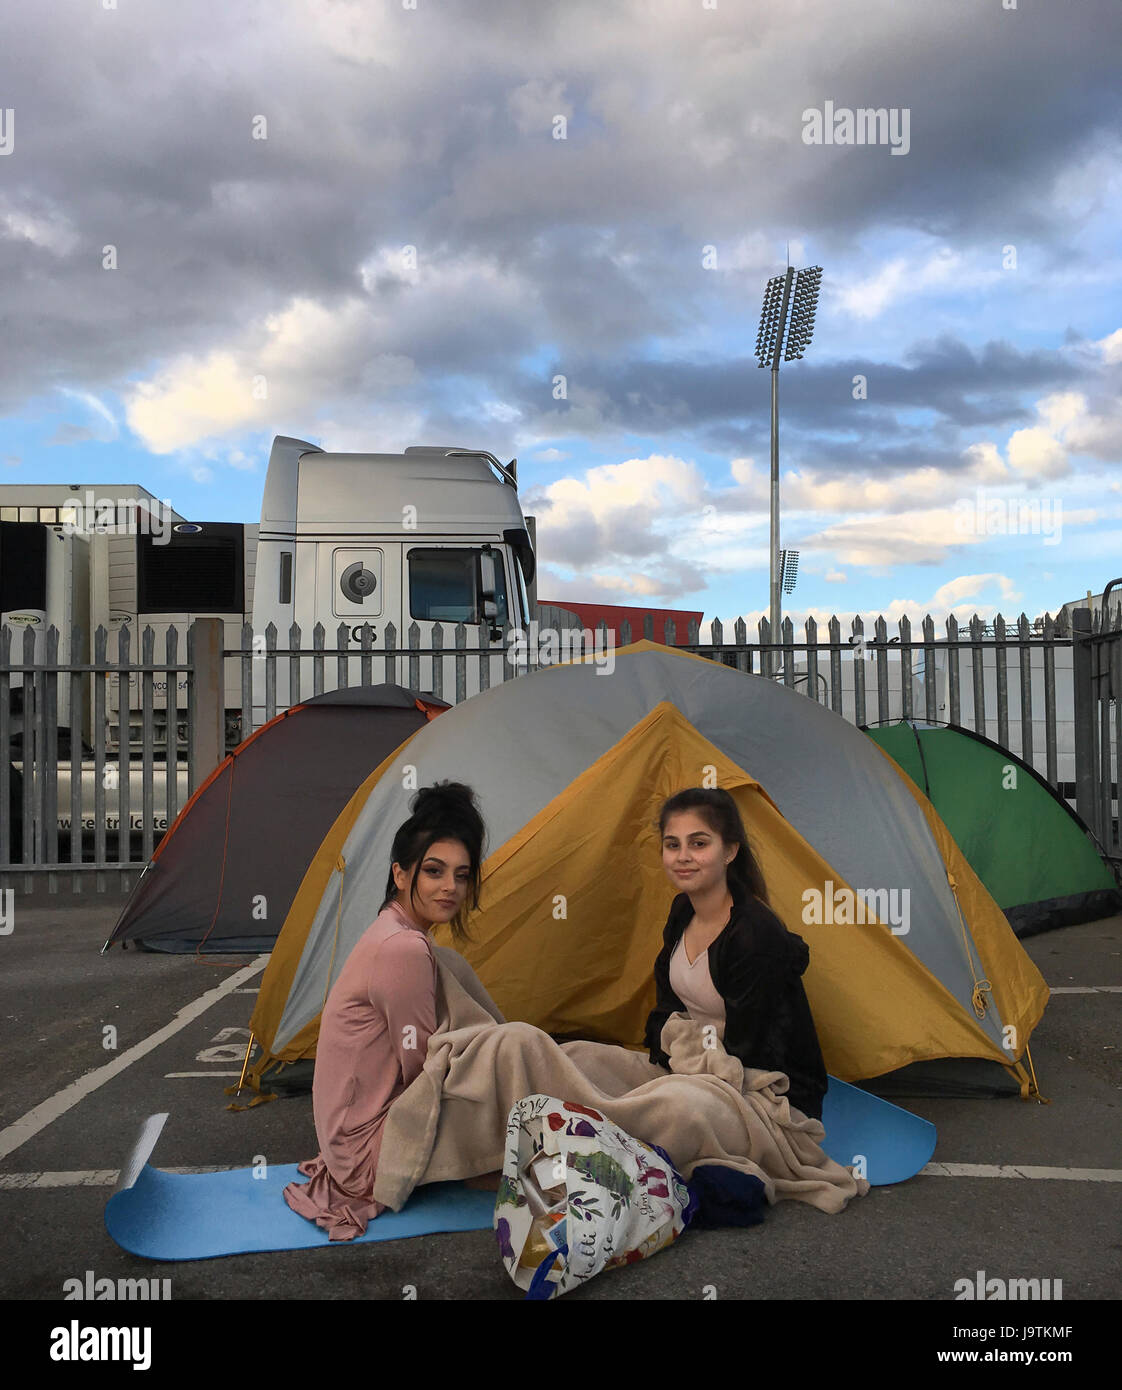 Manchester, UK. 3rd June, 2017. sisters l-r Yasmin Ishaq (aged 19) and Nadiq Ishaq aged 18 are first in the queue for tomorrows One love concert at the Emirates Old Trafford stadium. Both sisters survived the bombing at the Ariana Grande concert on 22nd May 2017 in Manchester. They escaped via the fire escape. They face a long night as they arrived without a tent( tents in background belong to other people in queue. Credit: GARY ROBERTS/Alamy Live News Stock Photo